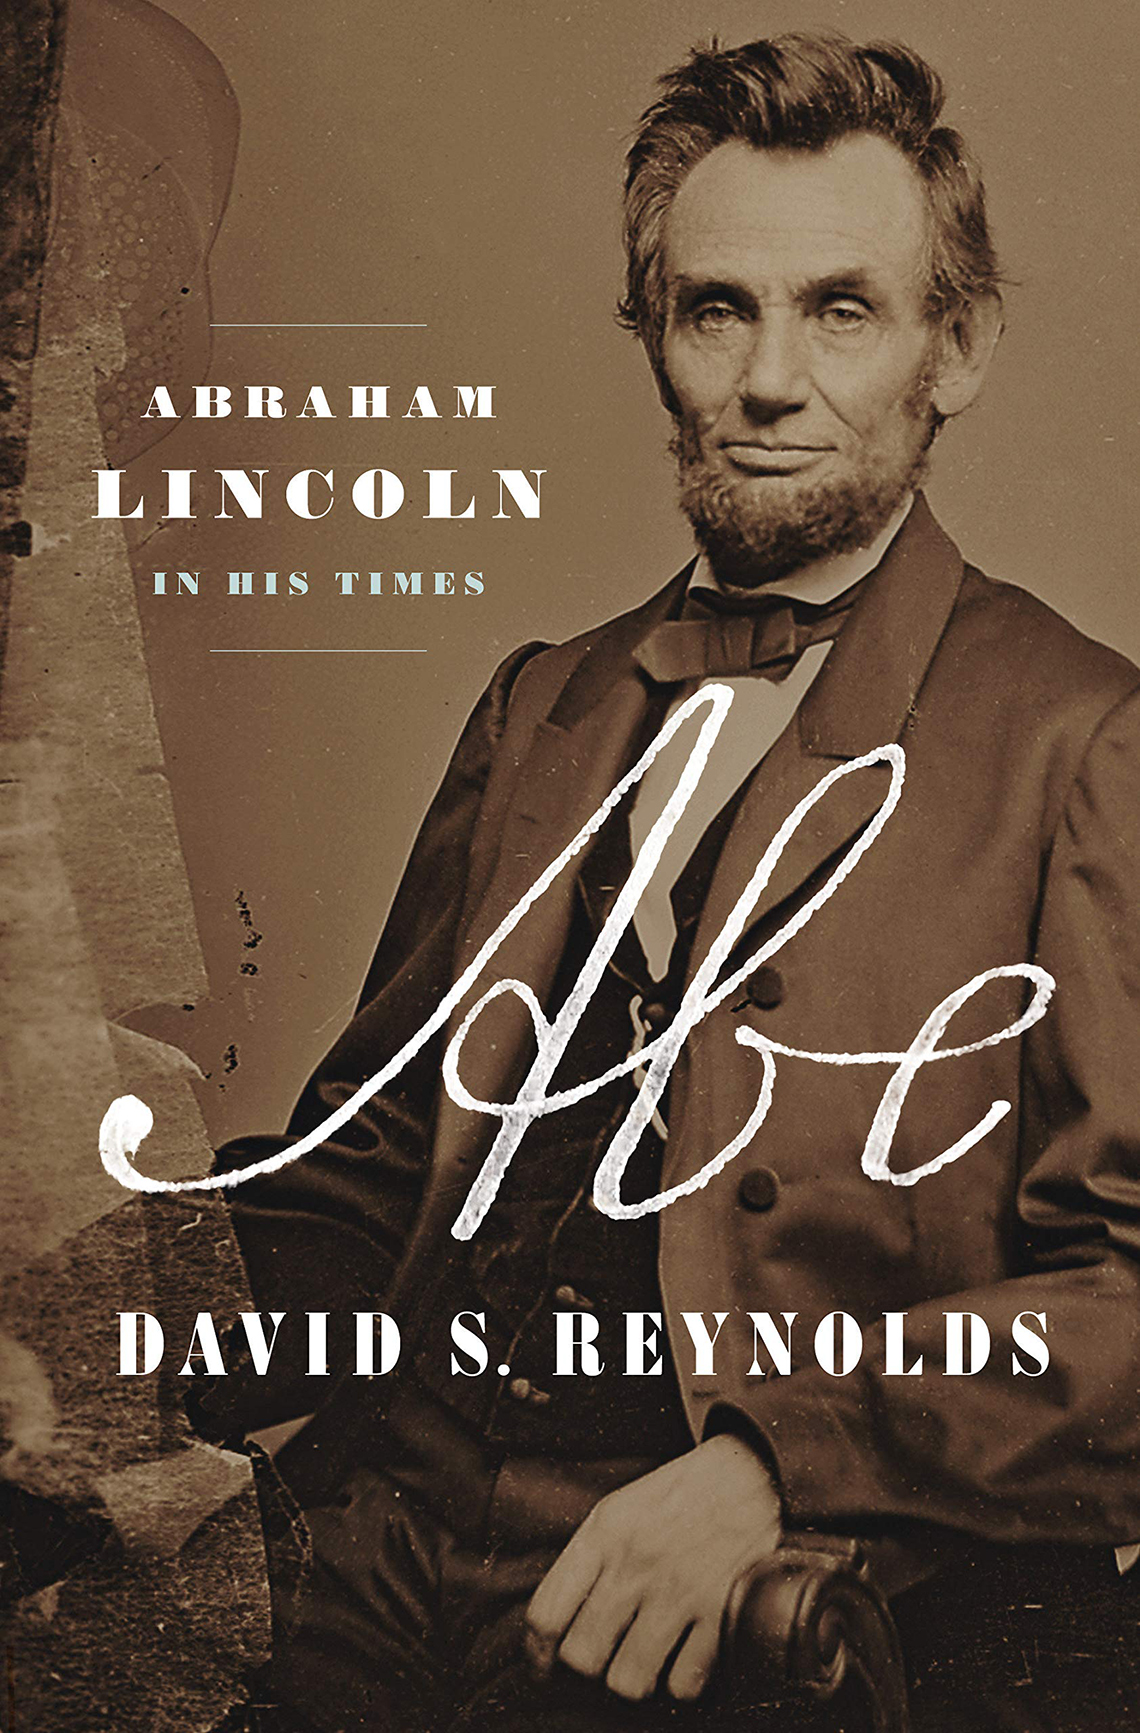 abe abraham lincoln in his times book by david s reynolds